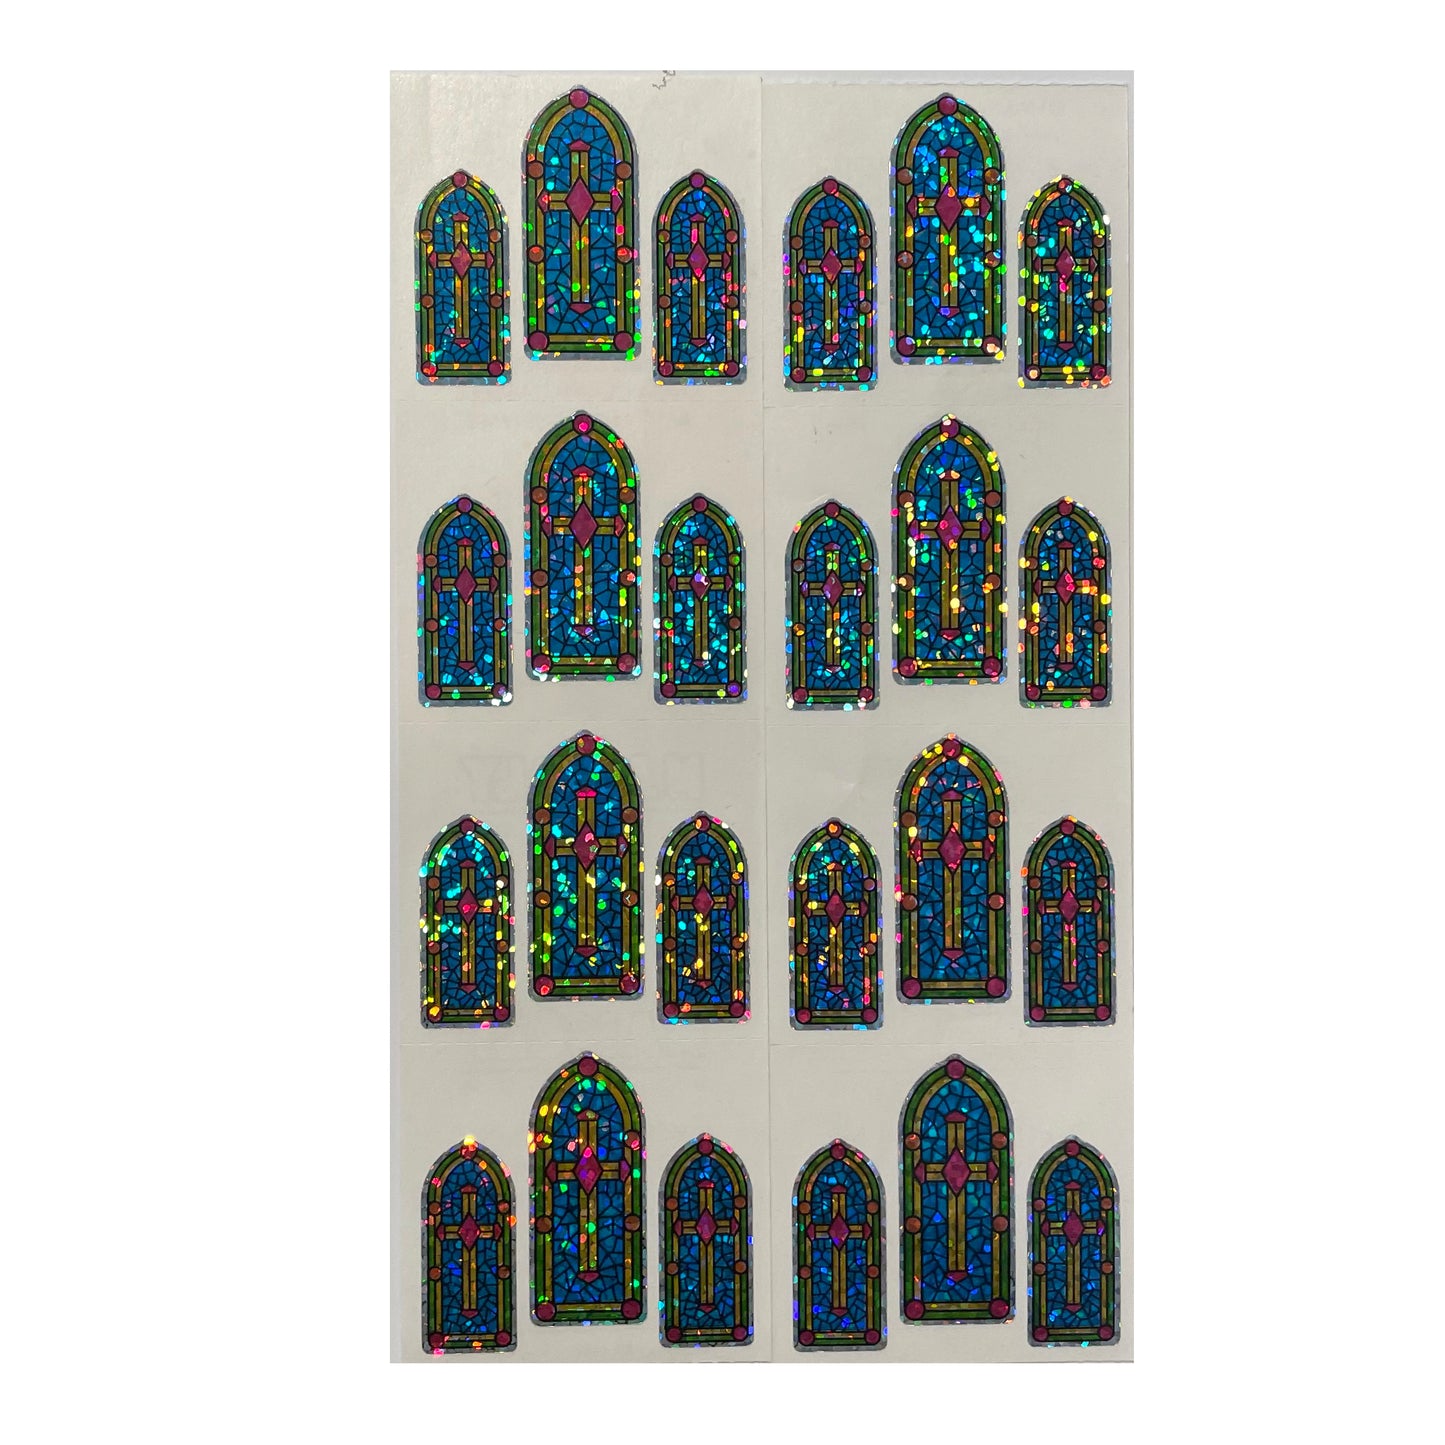 HAMBLY: Church Stained Glass Window glitter stickers